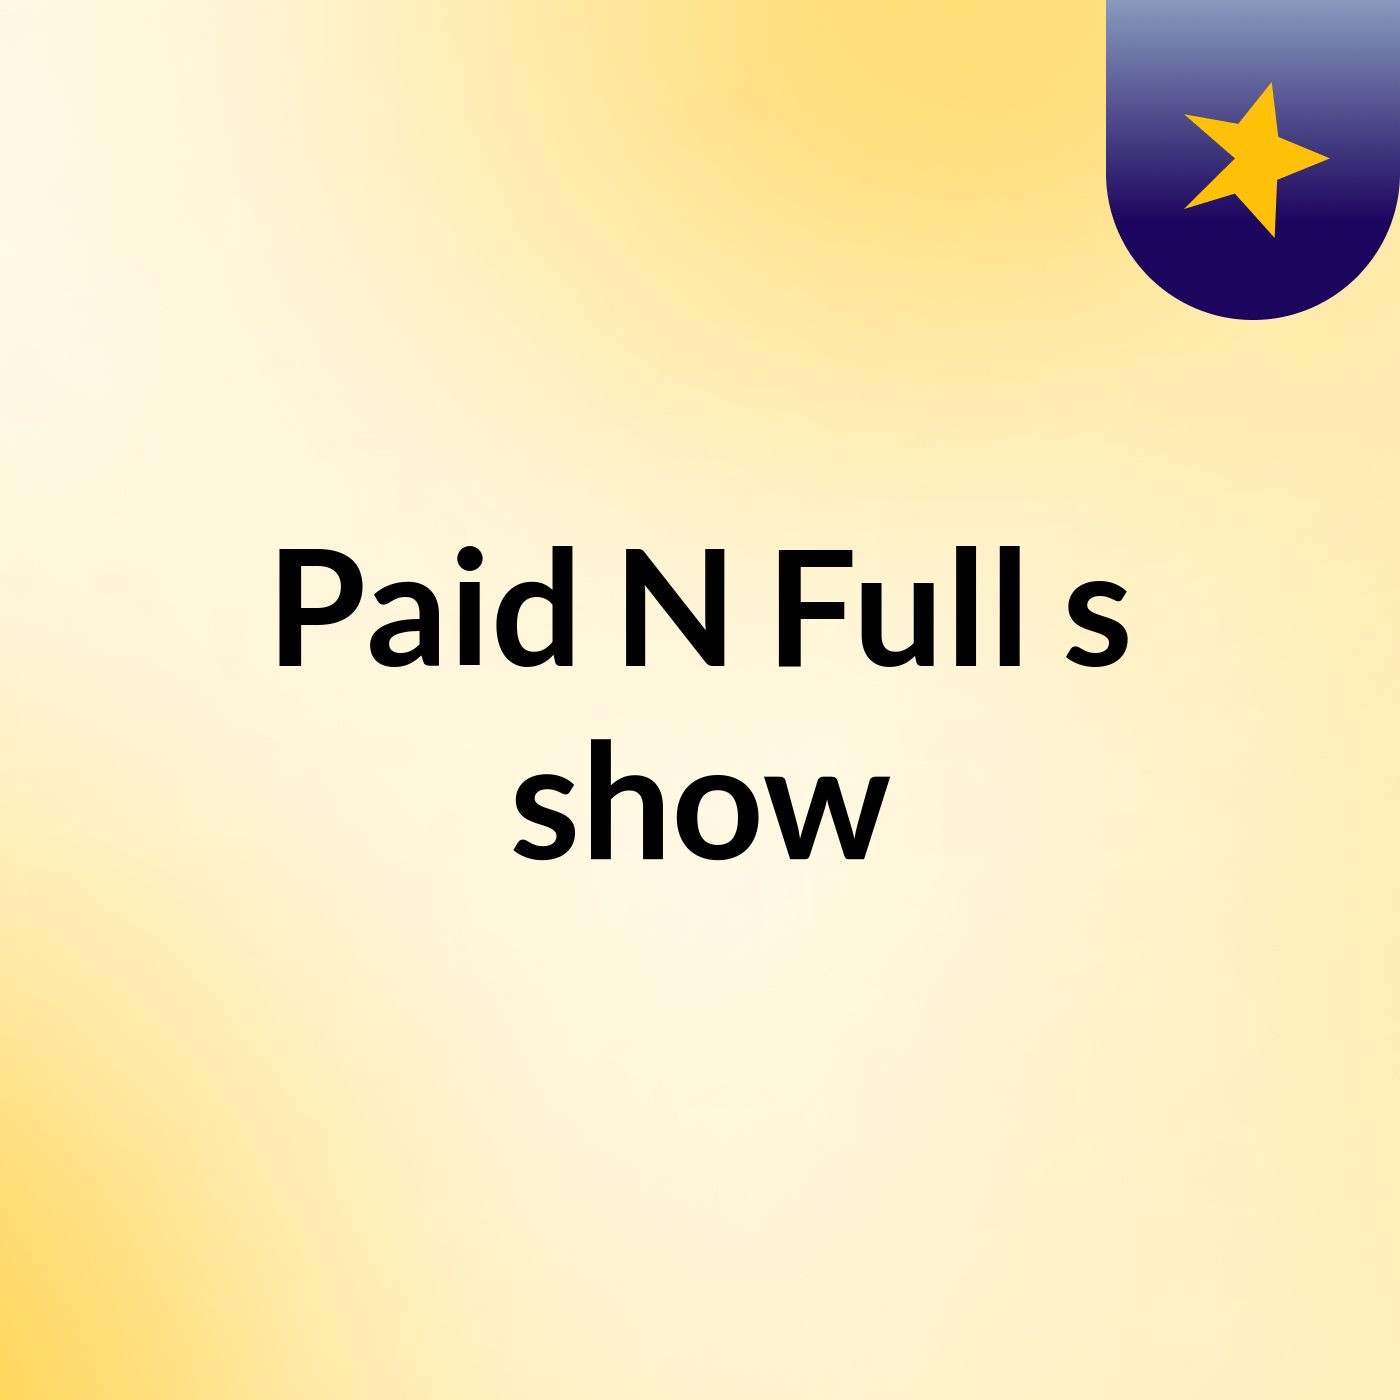 Paid N' Full's show